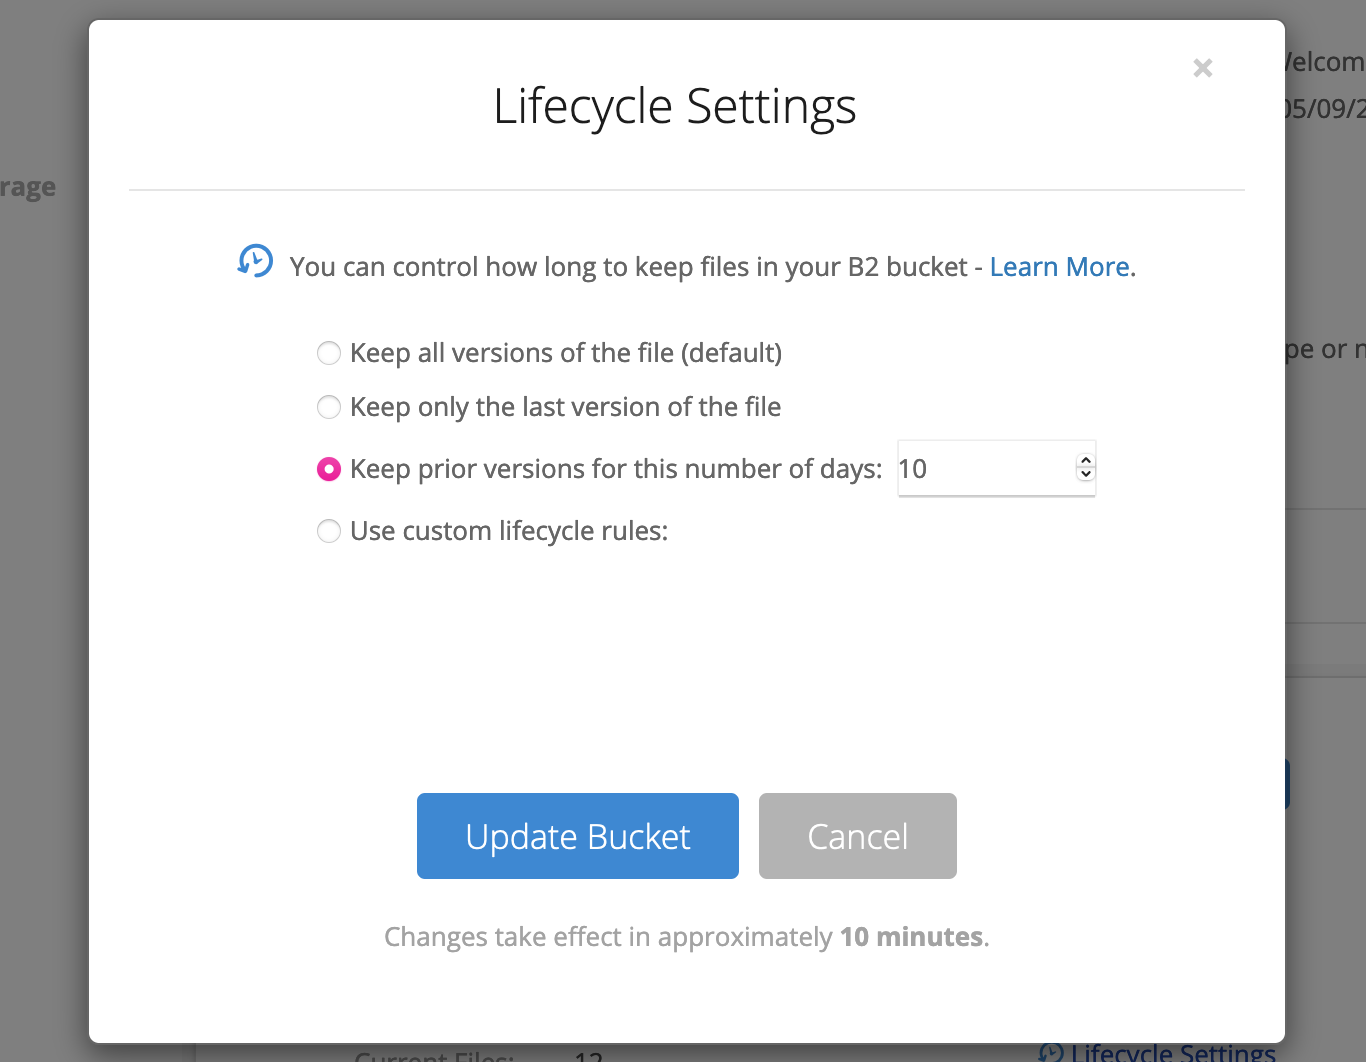 The &ldquo;lifecycle settings&rdquo; interface